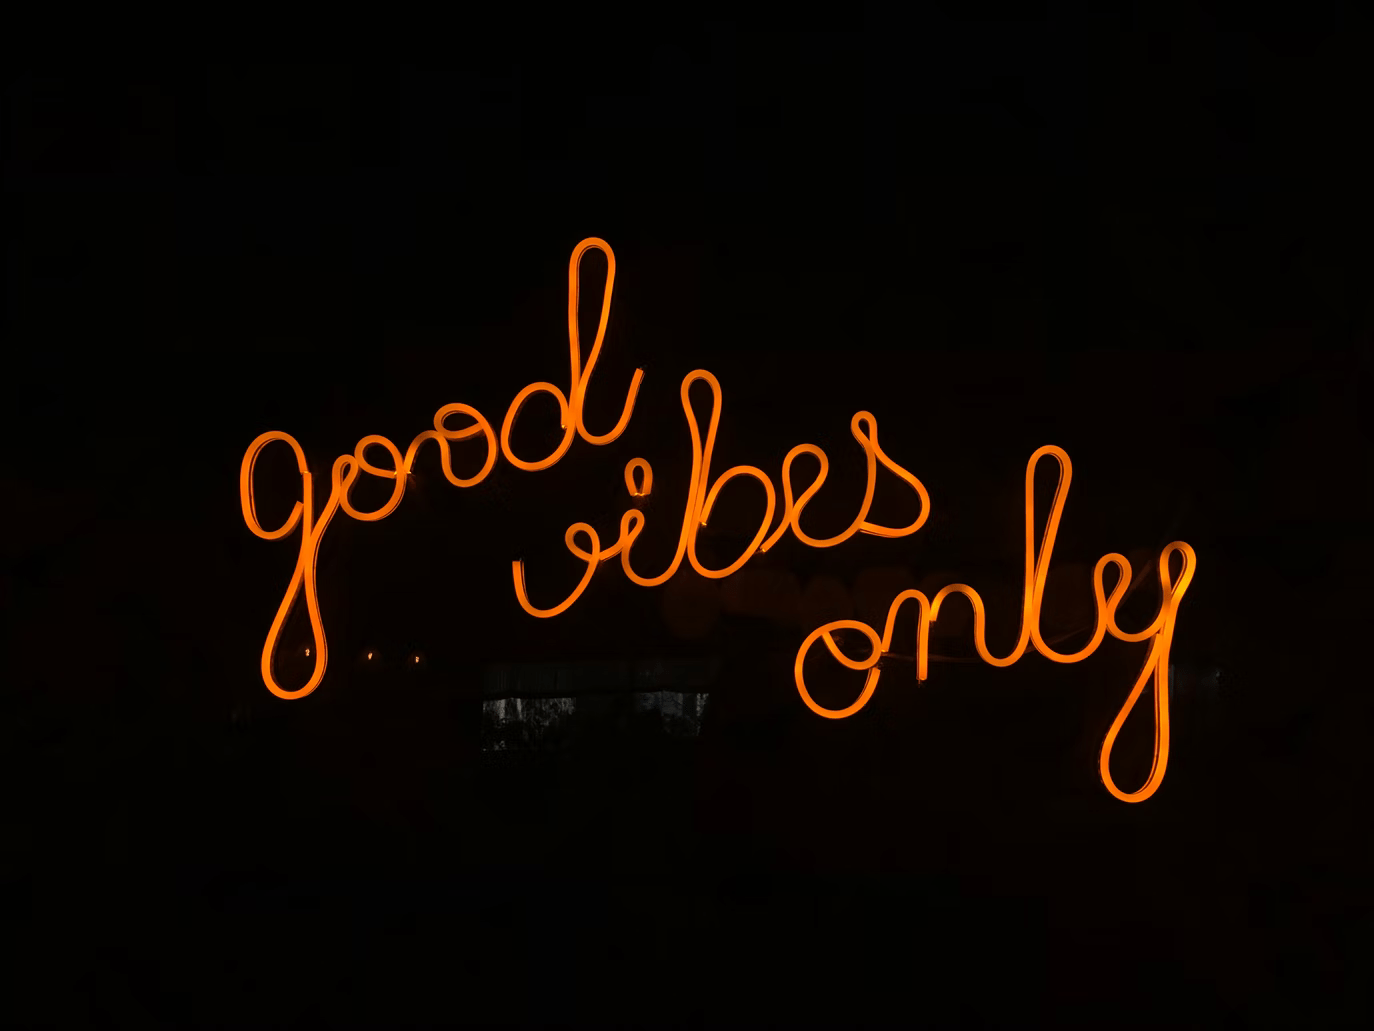 neon lettering "good vibes only"